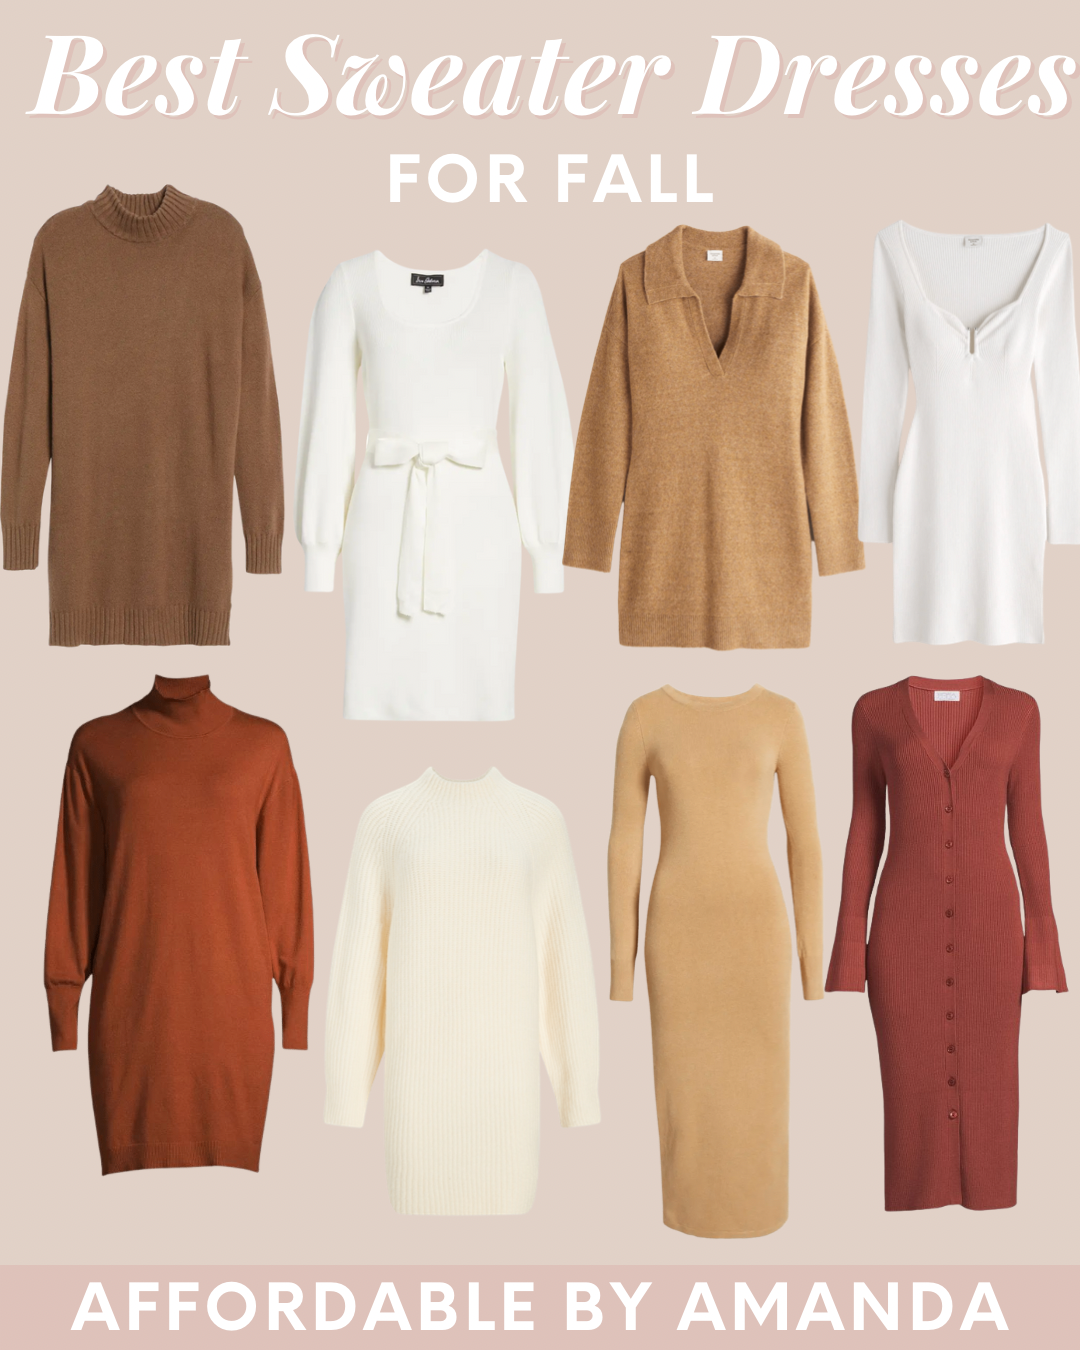 Best Sweater Dresses for Fall 2022 - Affordable by Amanda